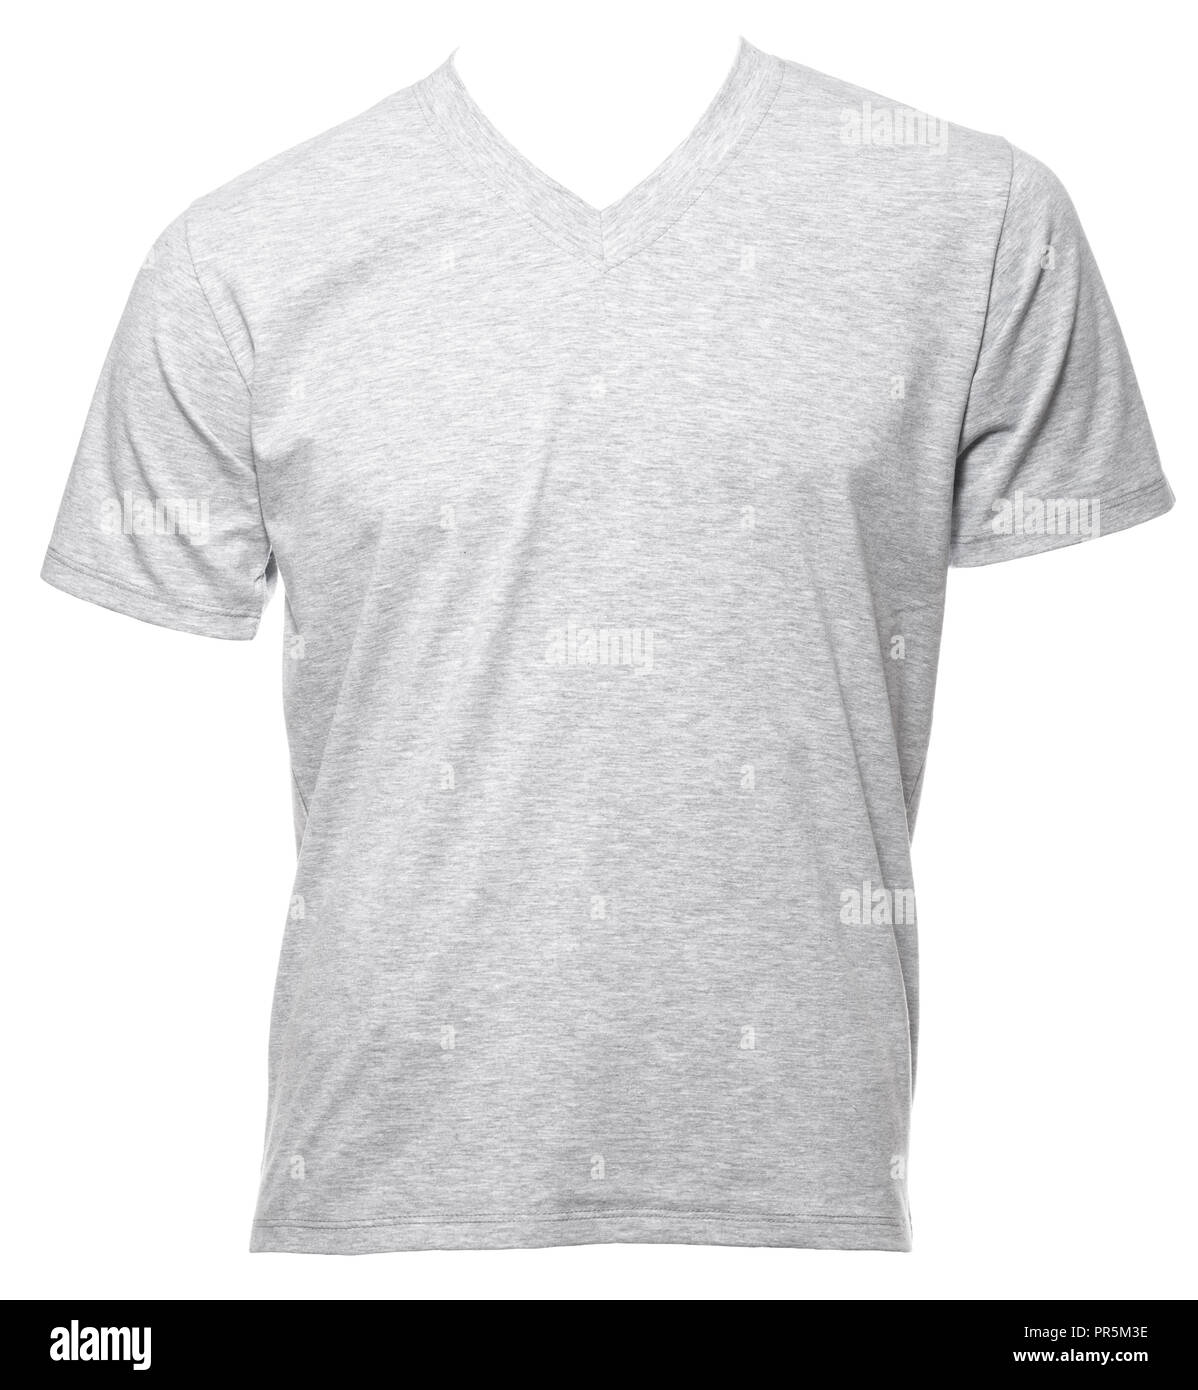 Grey heathered shortsleeve cotton T-Shirt template isolated on a white background Stock Photo